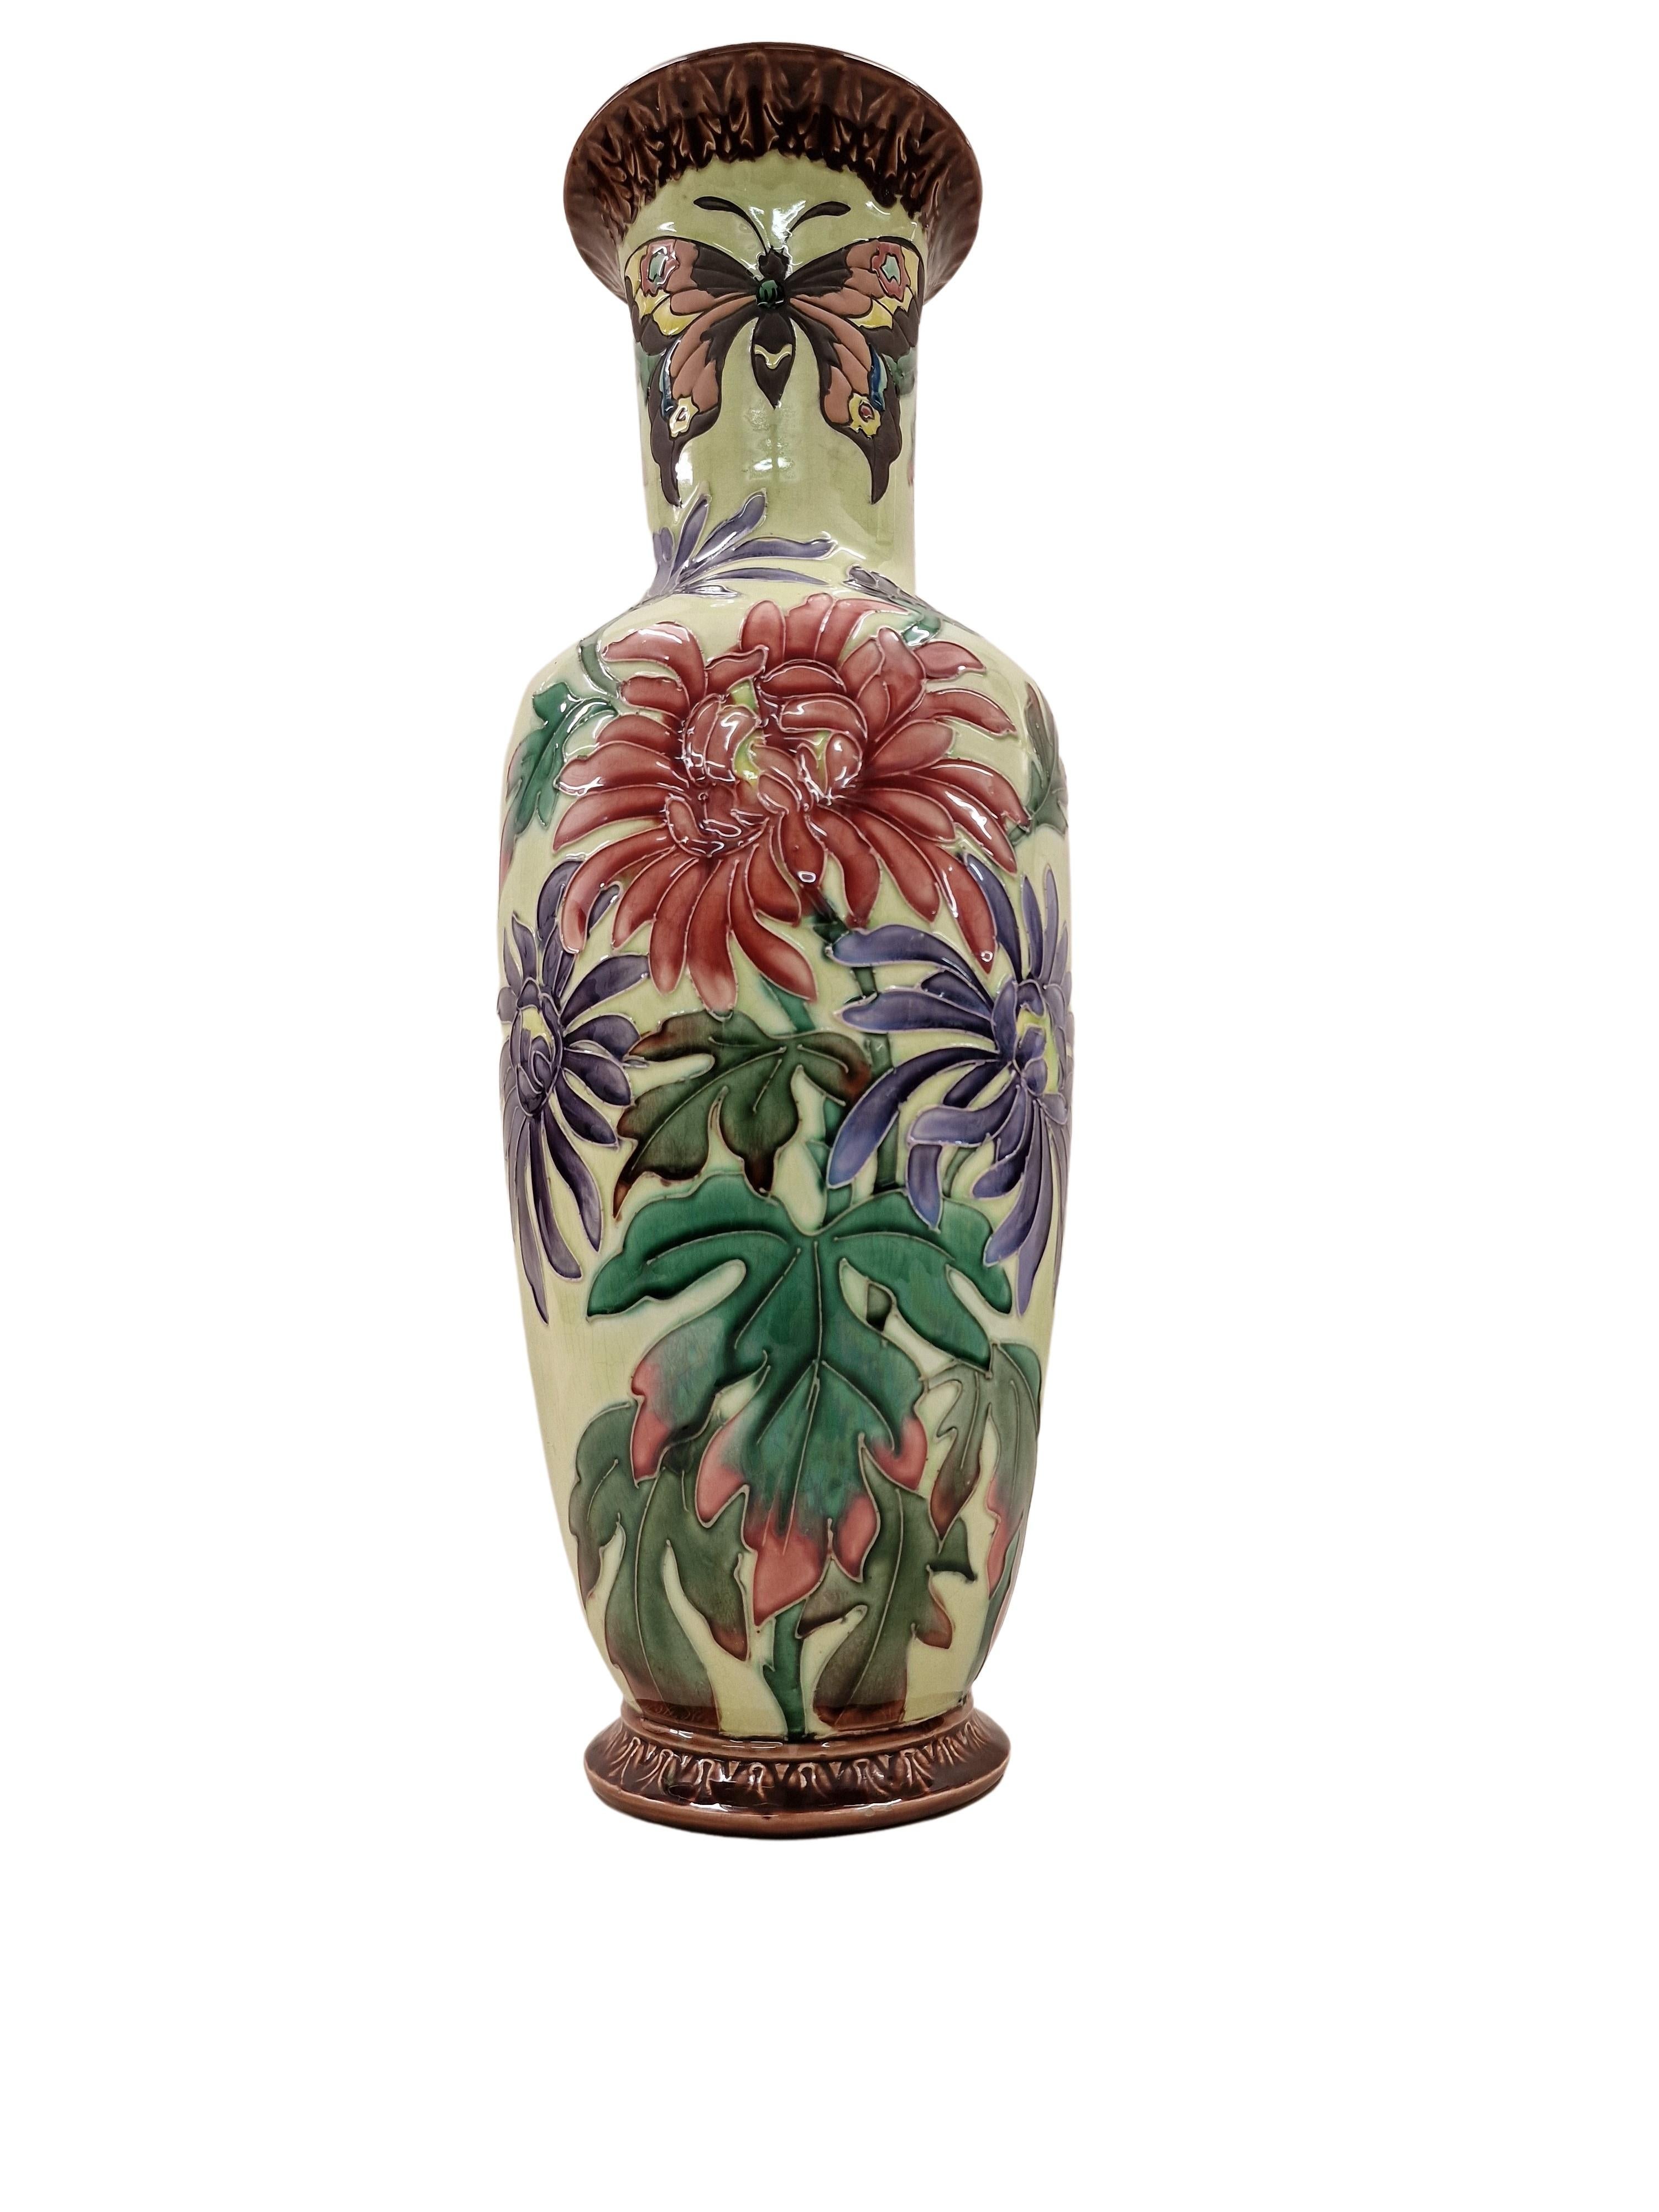 High quality floor stand vase, from France from the Art Nouveau / Art Nouveau period, made around 1910. 
This vase is a huge ceramic piece with a exceptional, colourful decor of chrysanthemums and butterflies.
This exciting surface structure is